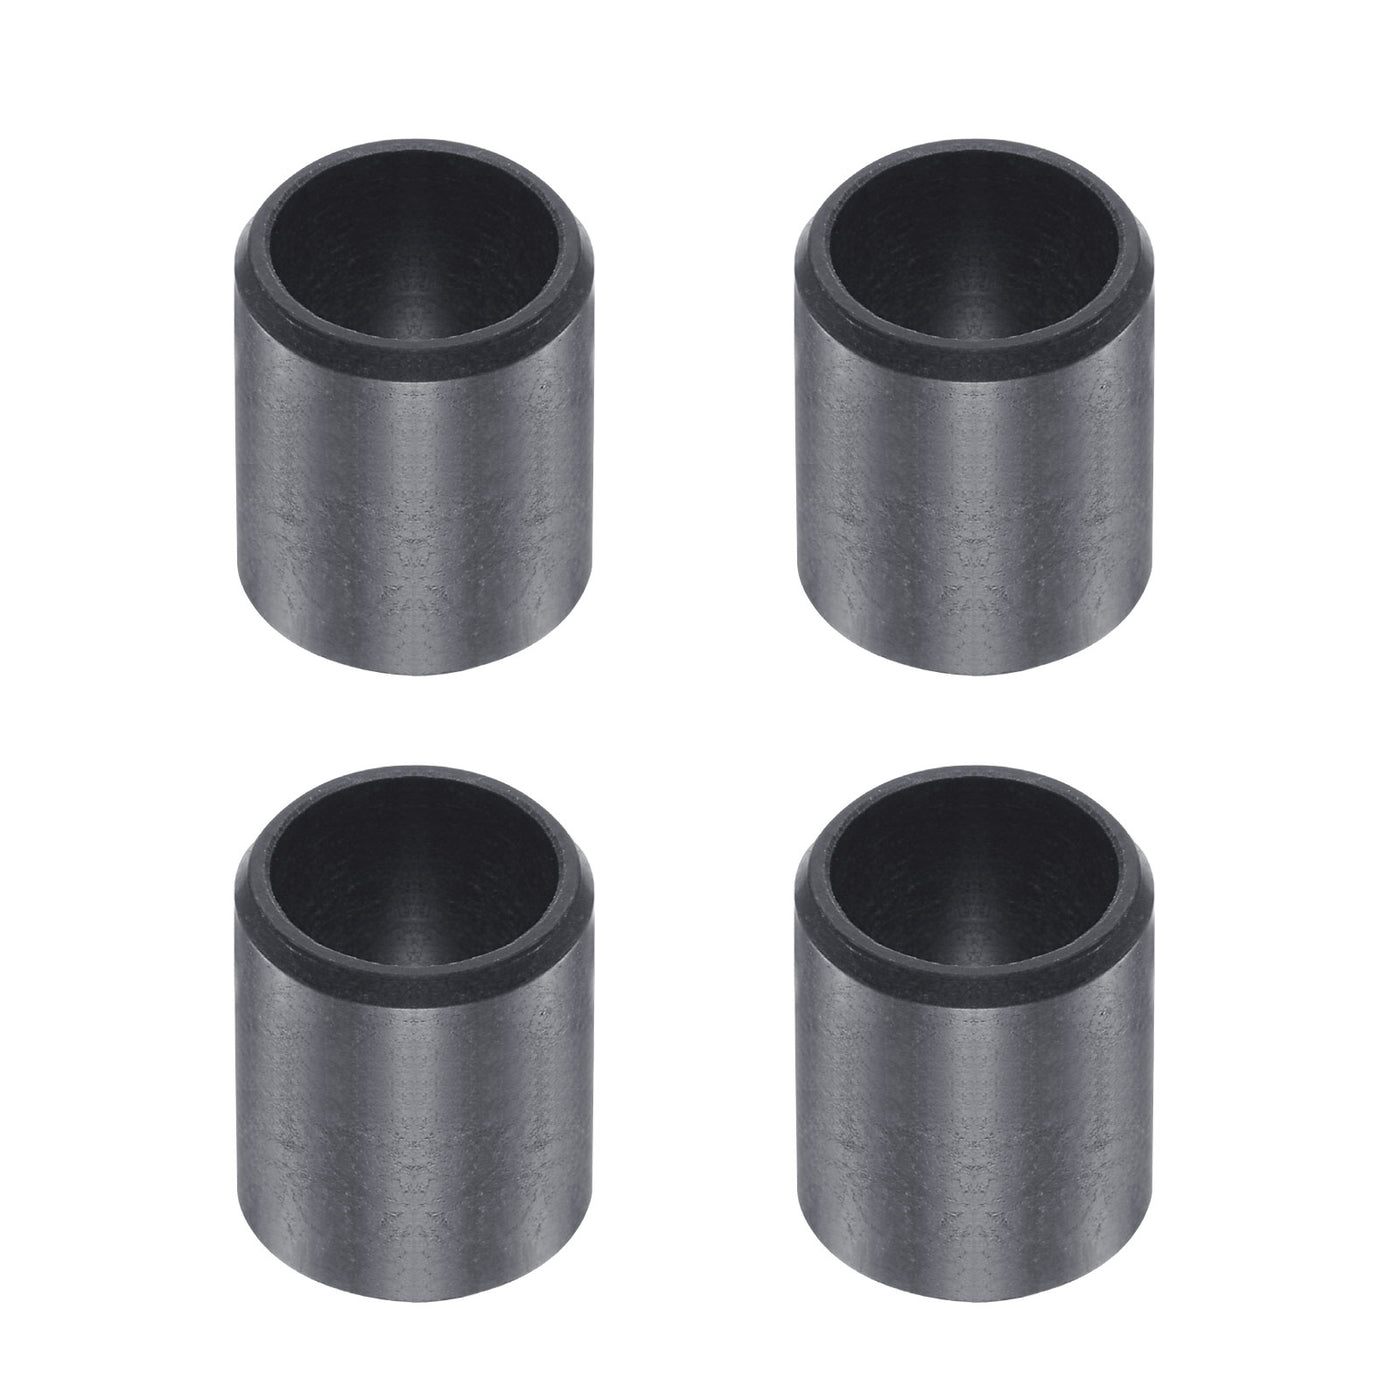 uxcell Uxcell Sleeve Bearings 8mmx10mmx12mm POM Wrapped Oilless Bushings Black 4pcs